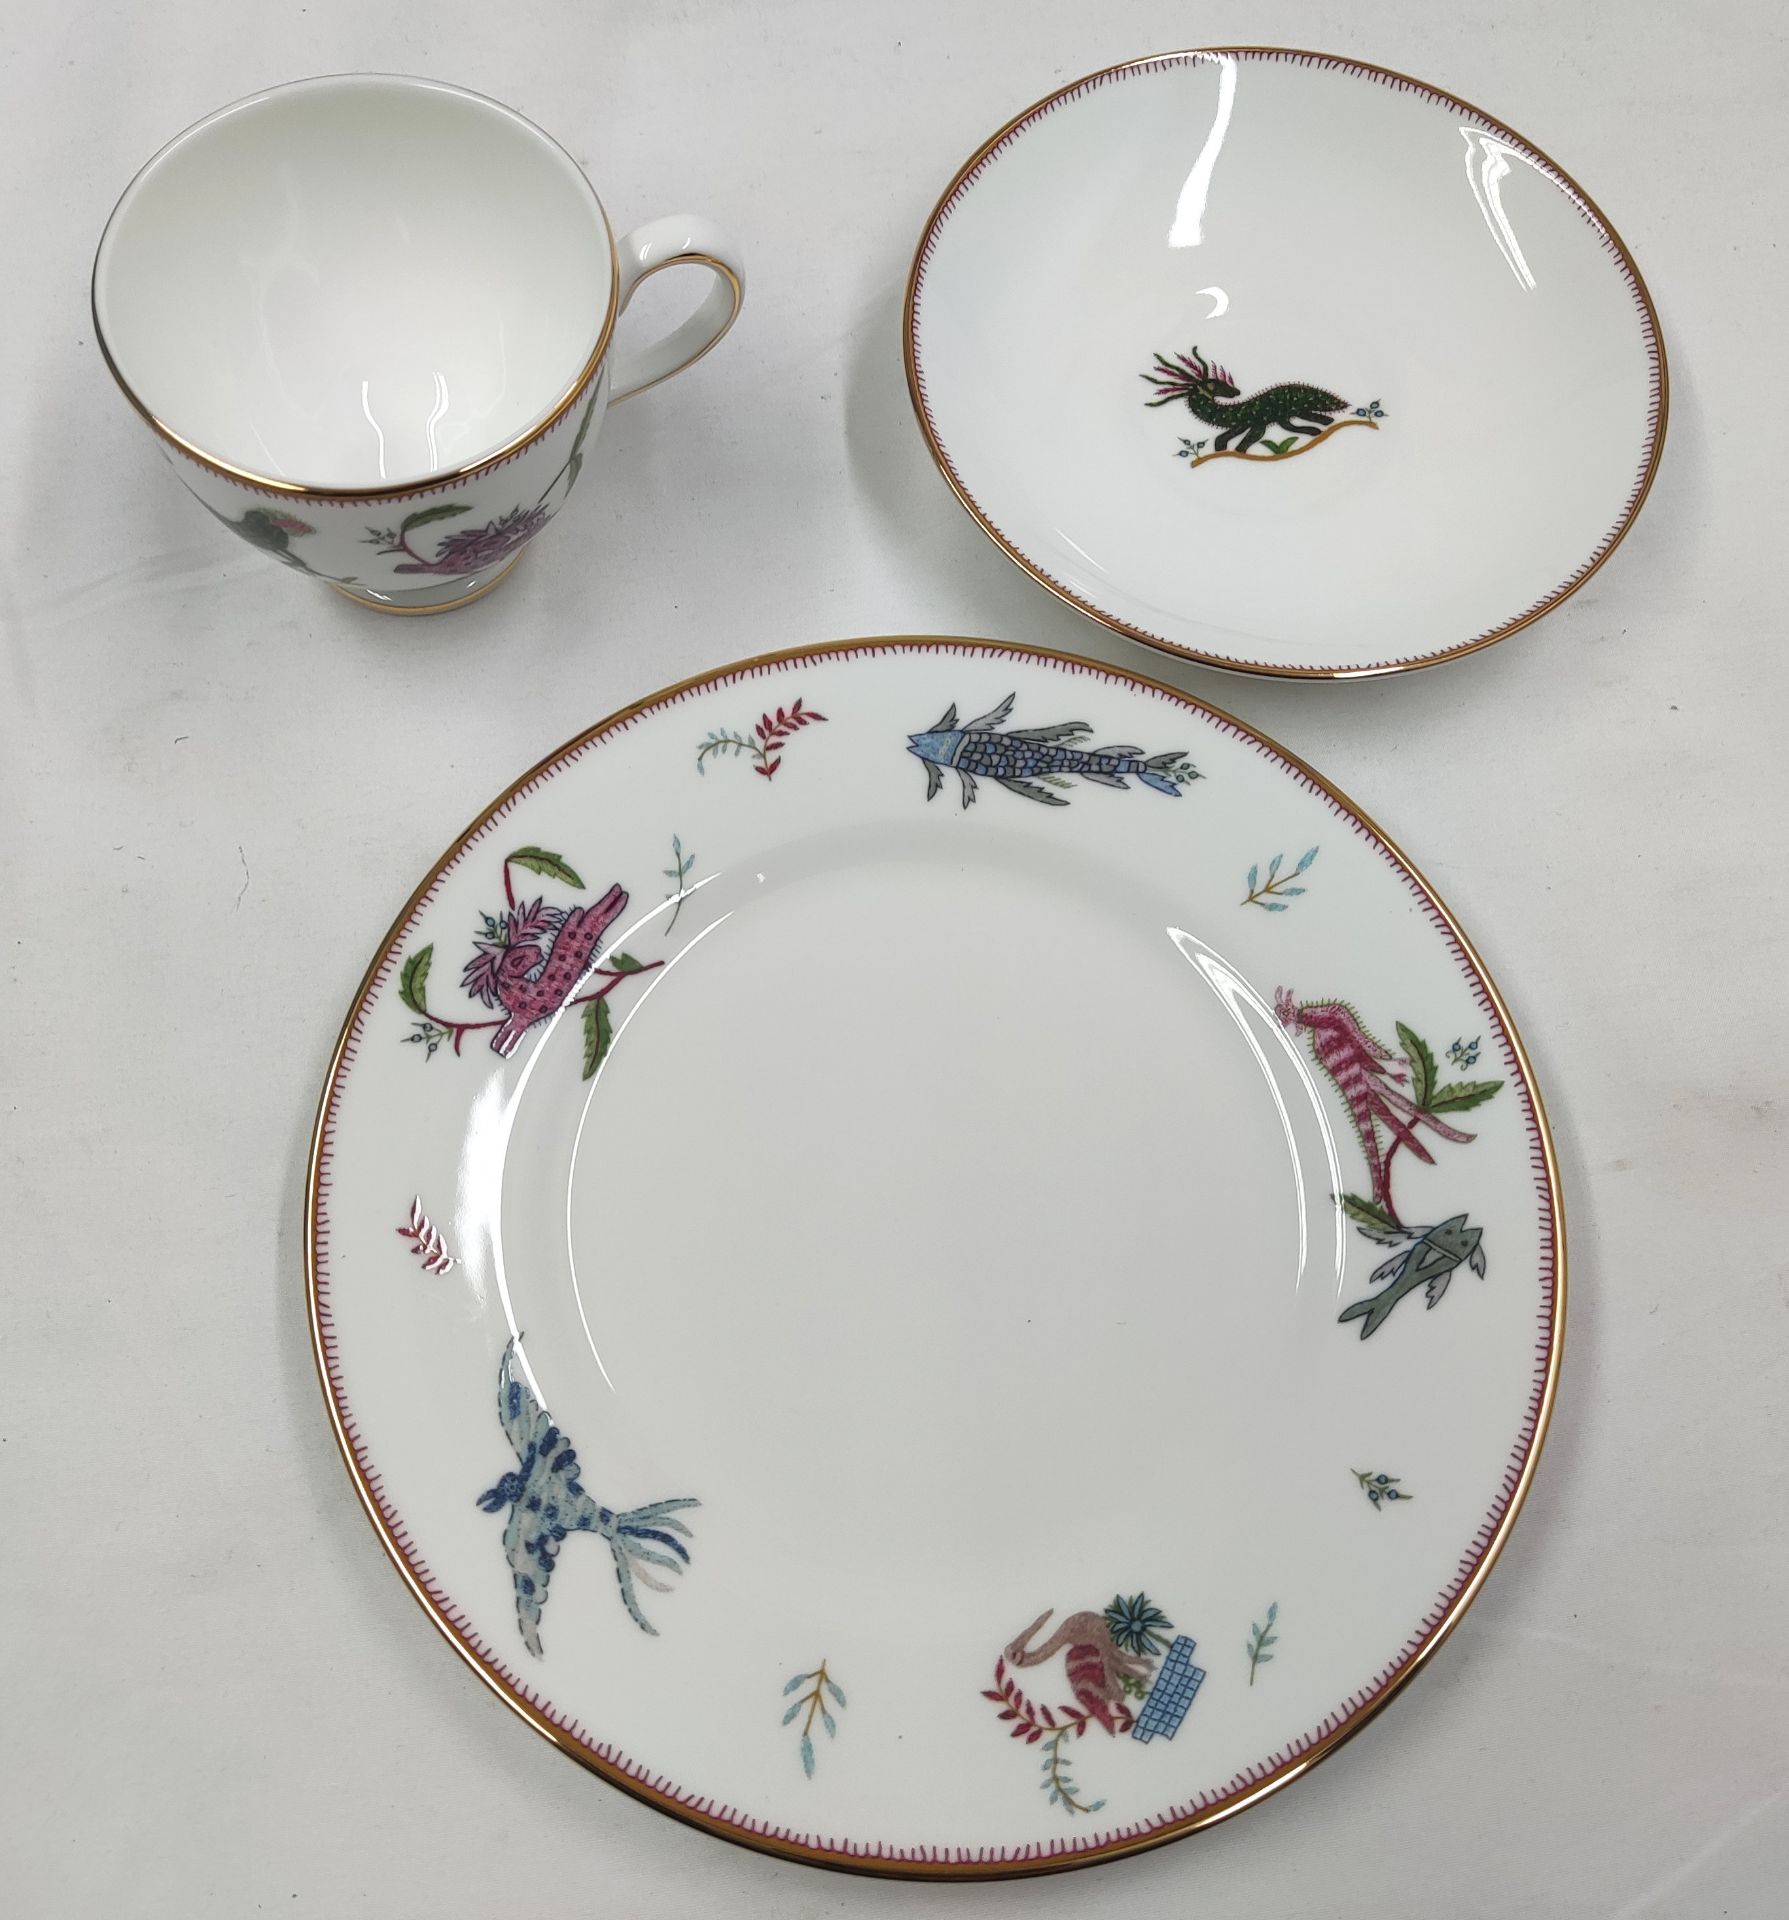 1 x WEDGWOOD Mythical Creatures Fine Bone China Teacup/Saucer/Plate Set - New/Boxed - RRP £140.00 - Image 5 of 20